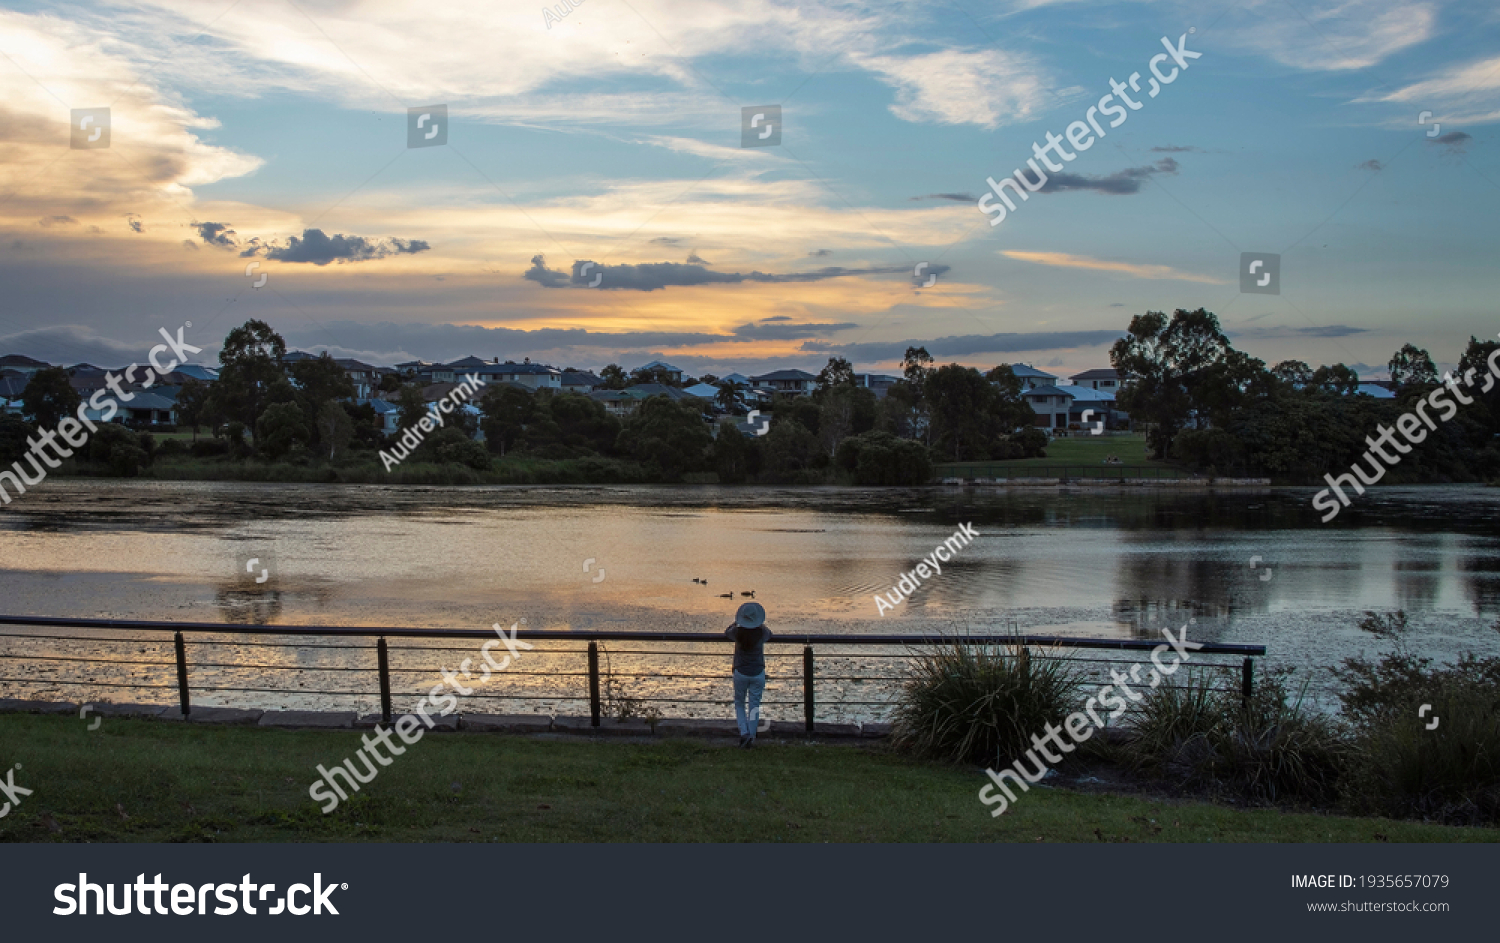 Woman looking at Ducks on a Suburban Man Made Lake at Dusk. Silhouette of trees and a Dramatic Sky in the background. #1935657079